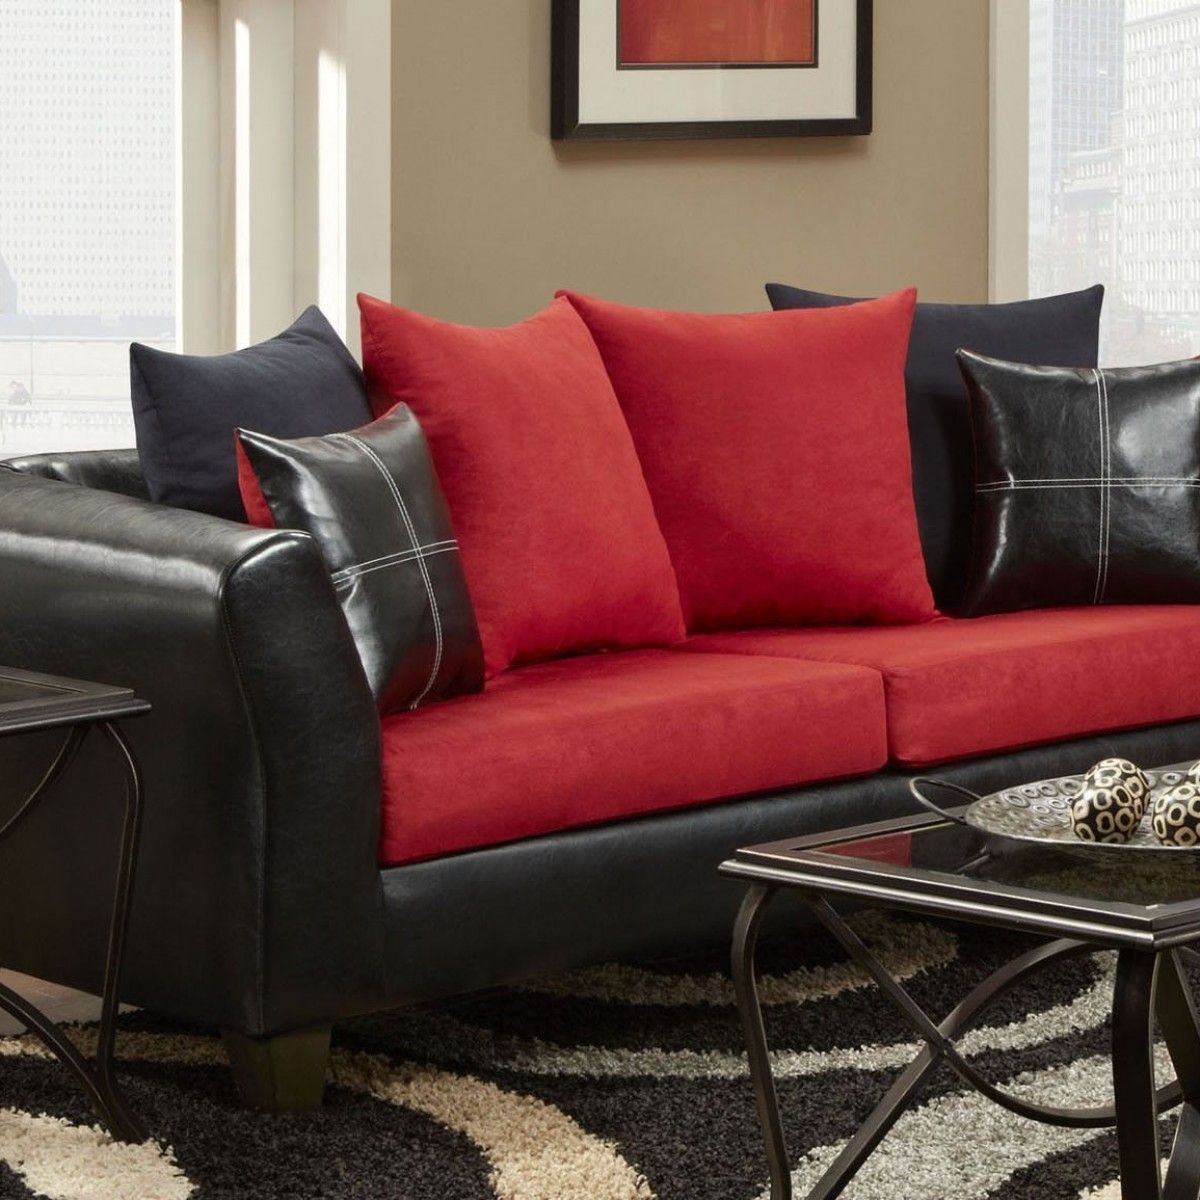 Getting Cheap Sectional Sofas Under 400 Dollars Within Newest Sectional Sofas Under  (View 1 of 15)